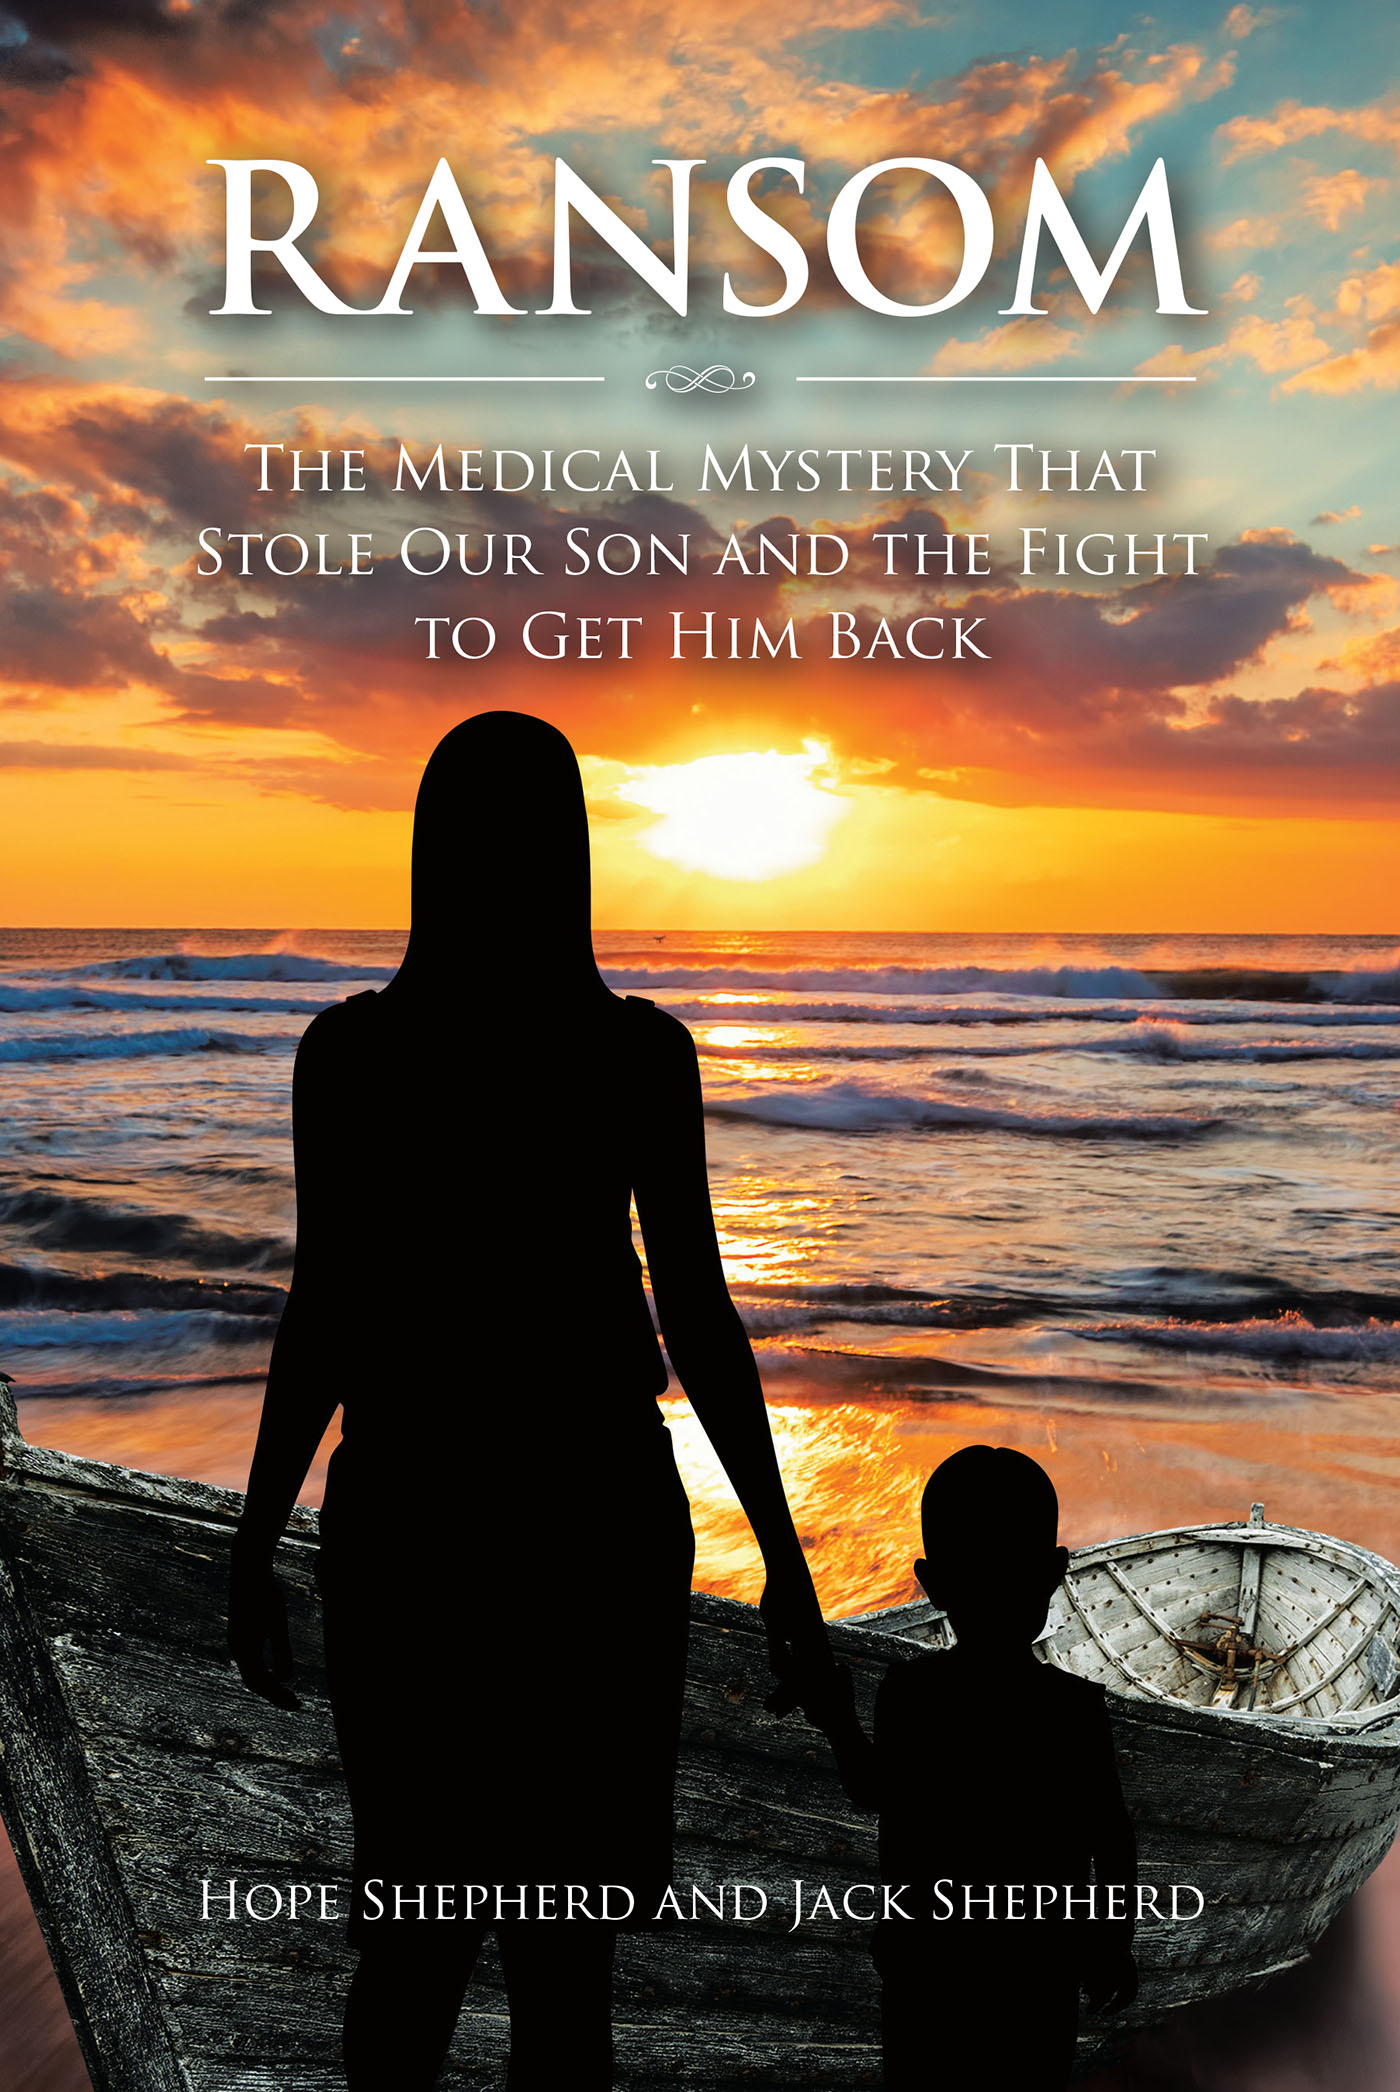 Authors Hope Shepherd and Jack Shepherd’s New Book, "Ransom," Recounts the True Story of Hope’s Fight to Solve the Medical Mystery Her Son Jack Was Experiencing